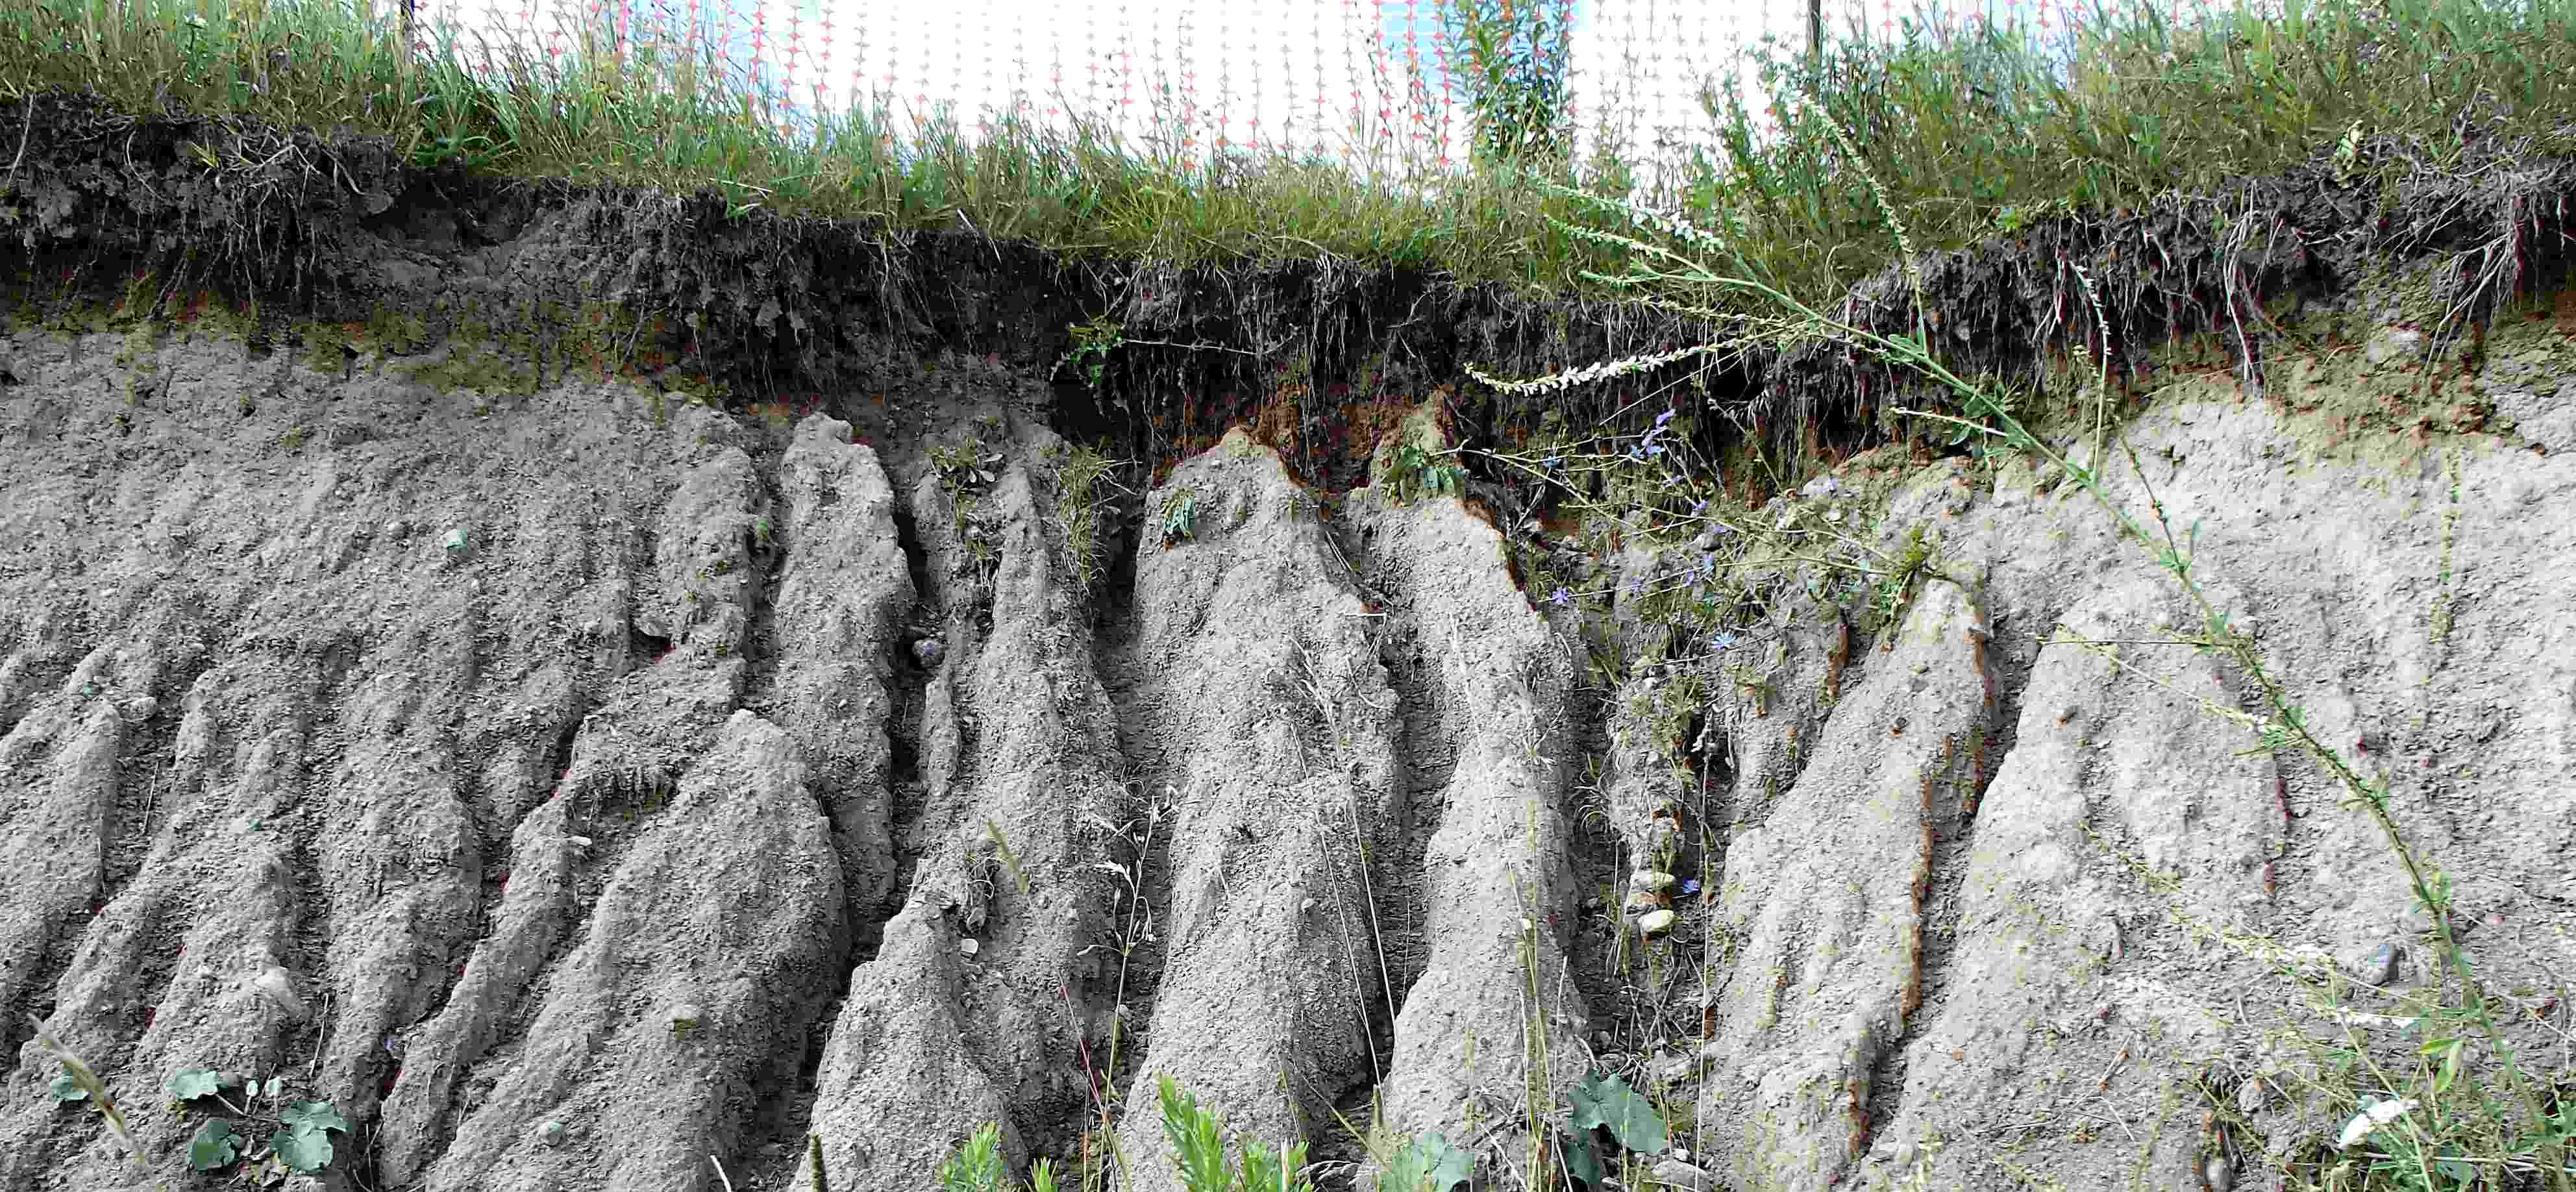 This image is a front facing view of an eroding bank where grass turf is located at the top of the bank. The face of the slope features deep furrows called rill erosion which has resulted from water runoff being directed towards the unprotected slope face.